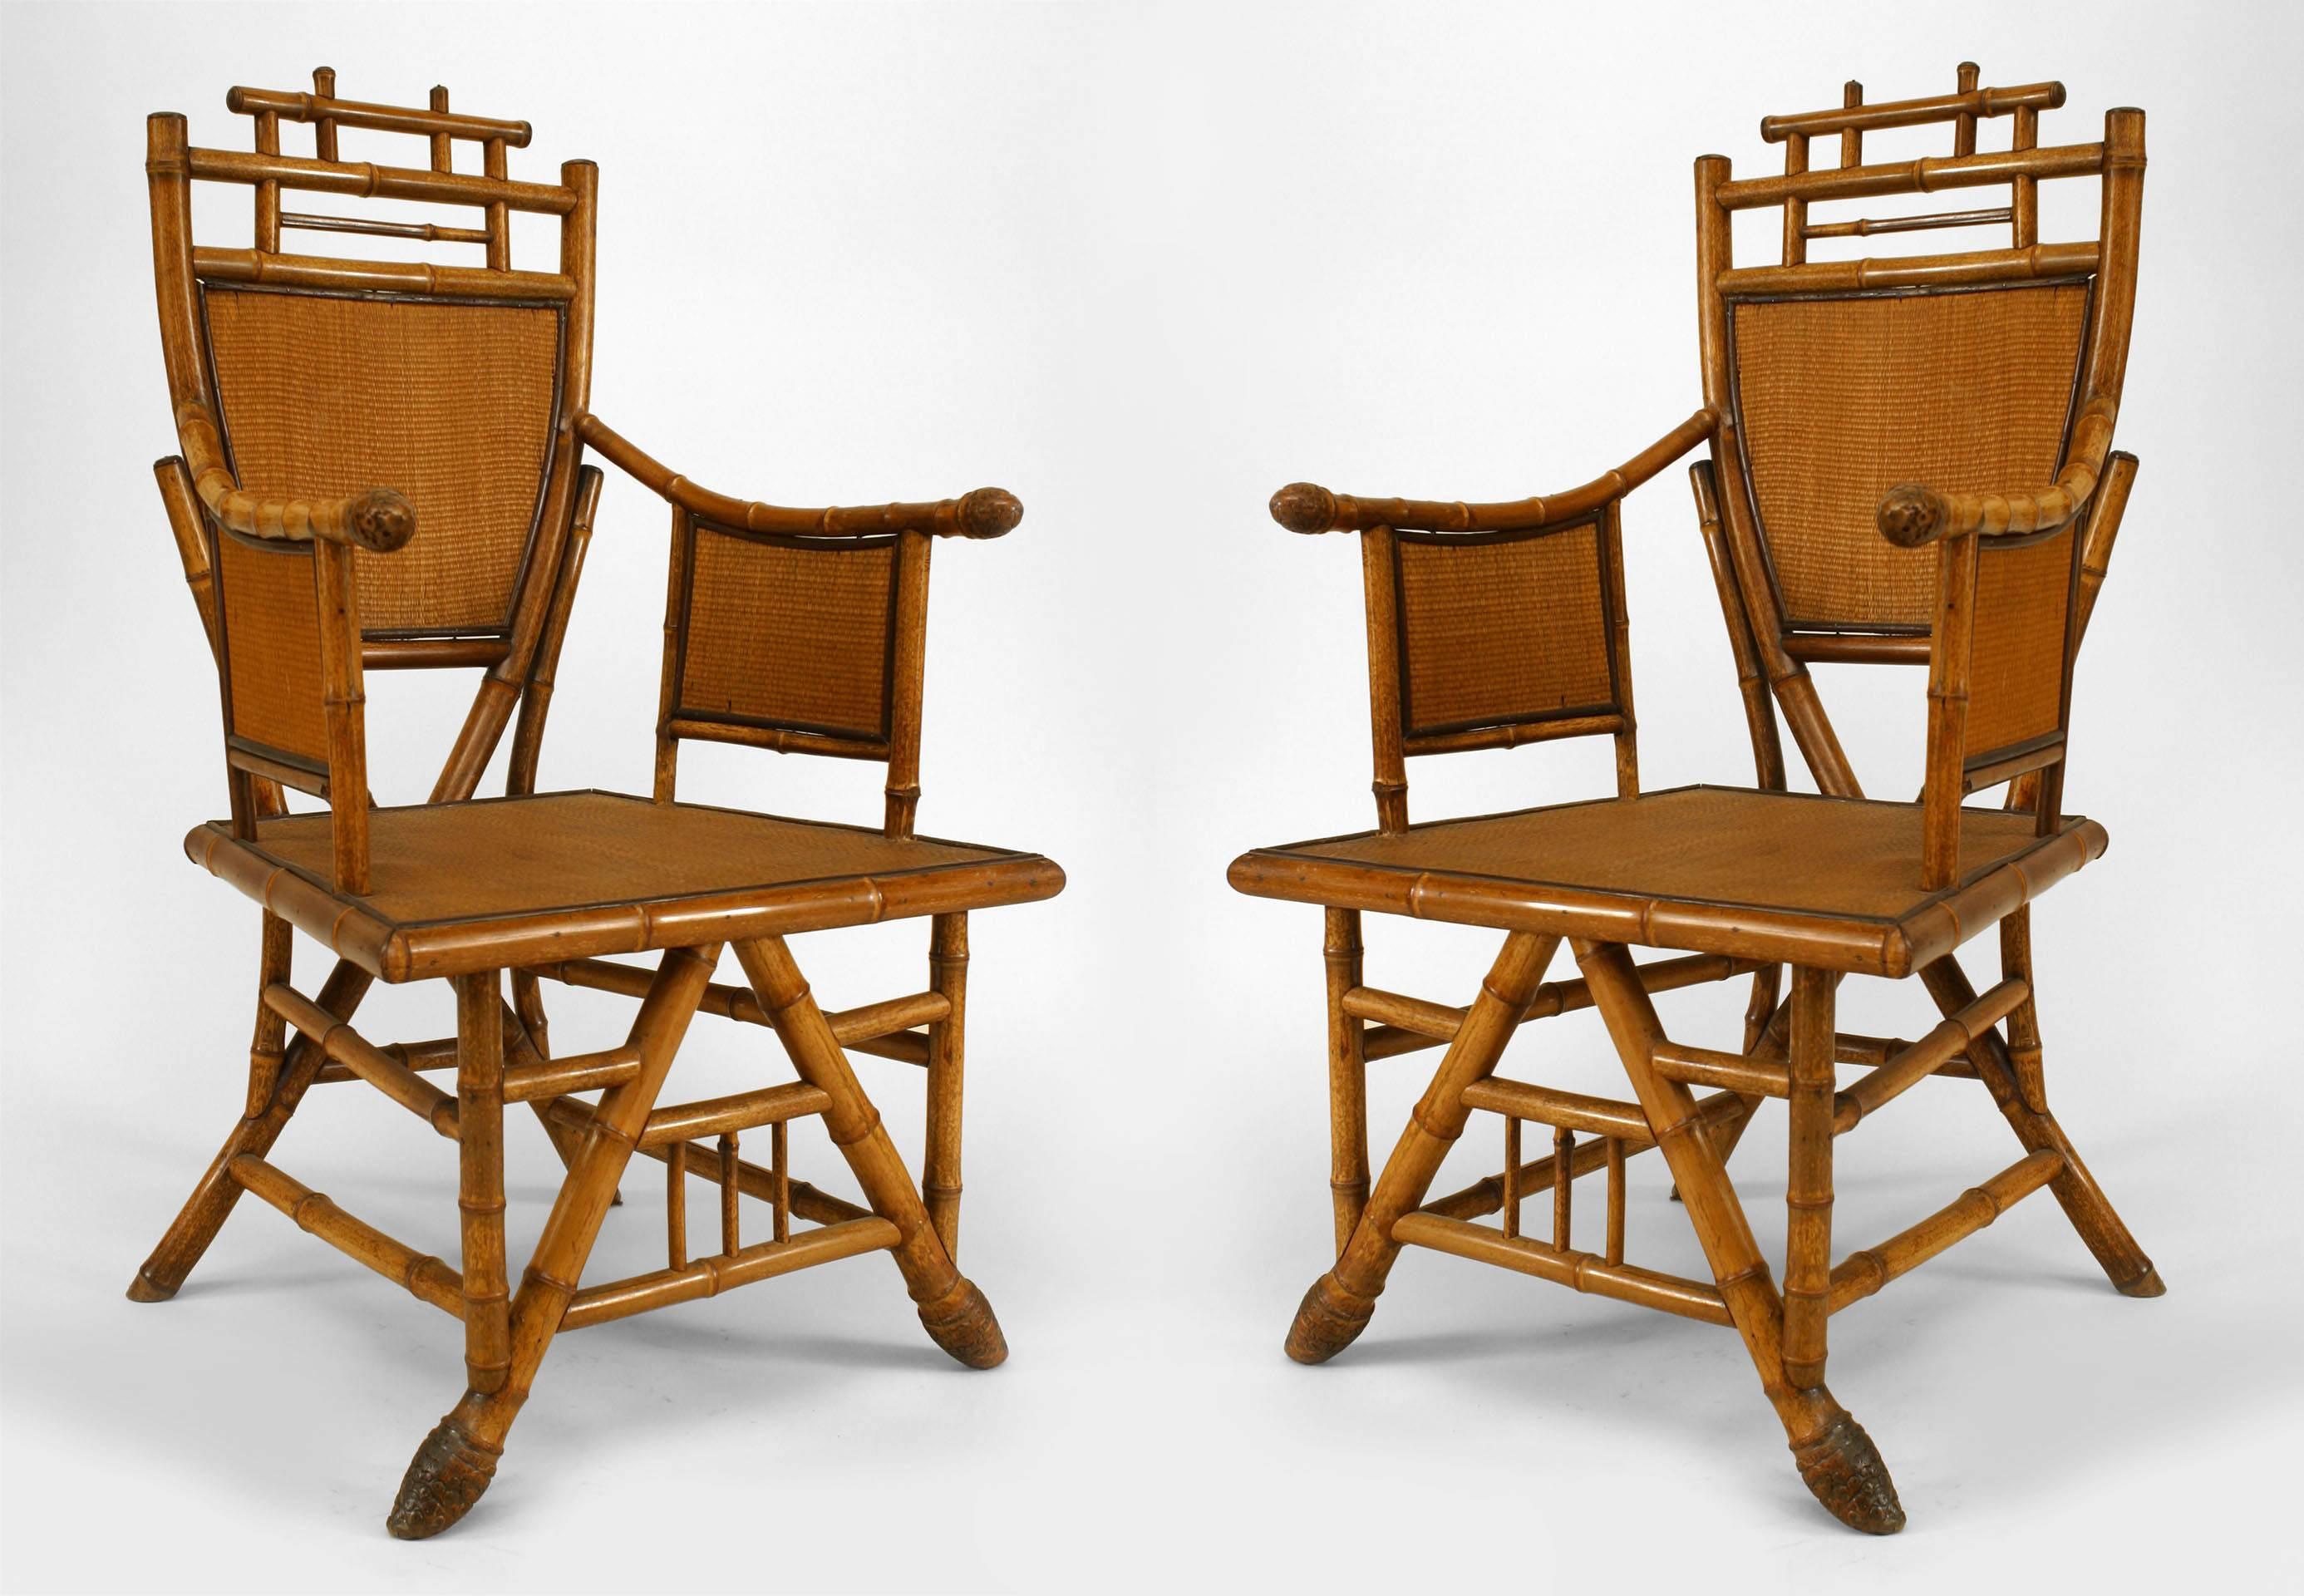 Pair of English Victorian bamboo shield back Armchairs with rush panels on seat, back, and arms (19th Cent)
